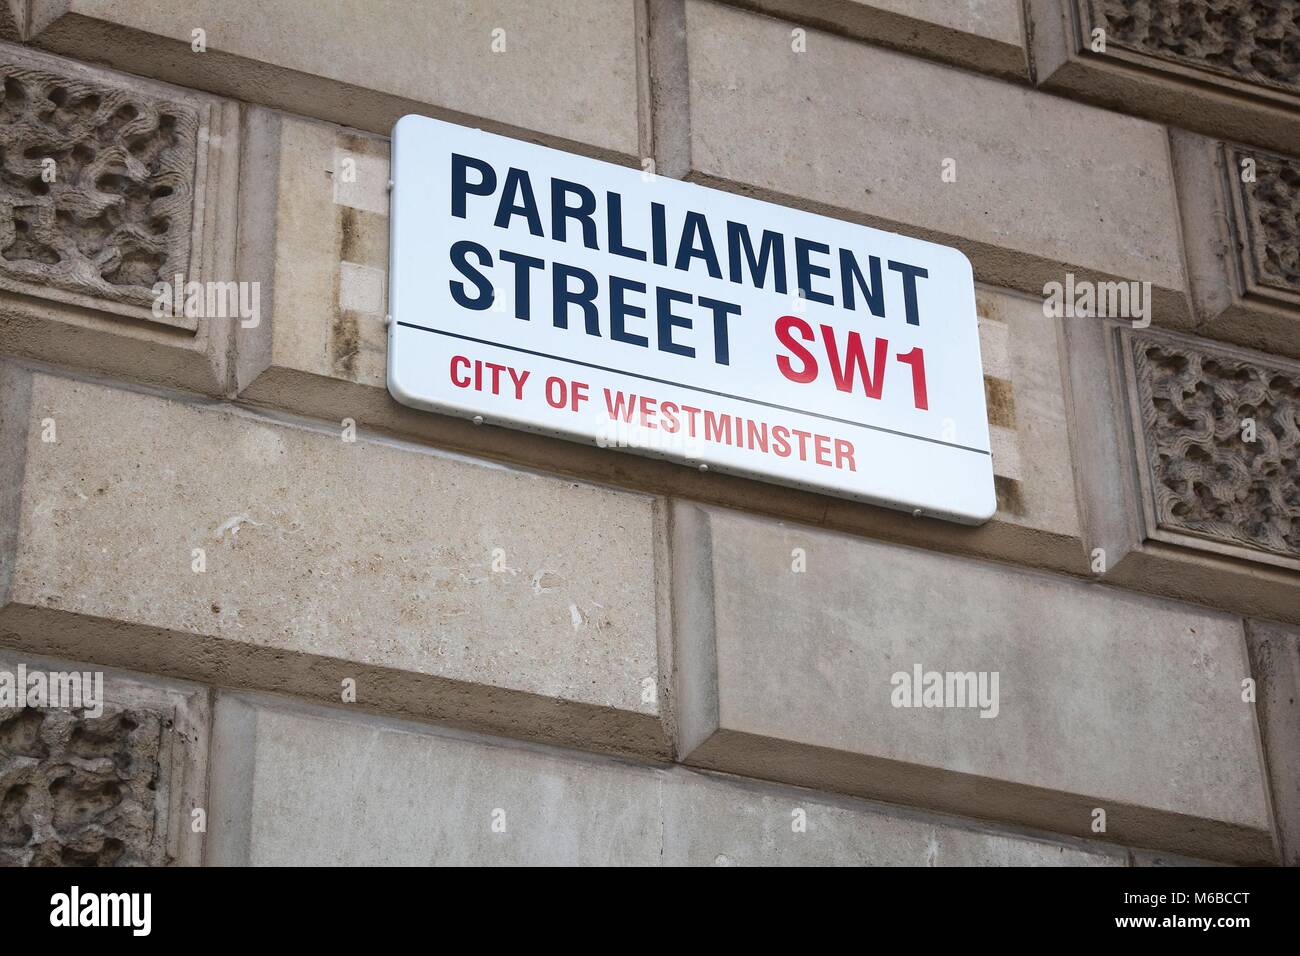 LONDON, UK - APRIL 23, 2016: Parliament Street sign in London, UK. Parliament Street is an extension of Whitehall, central street for Her Majesty's Go Stock Photo